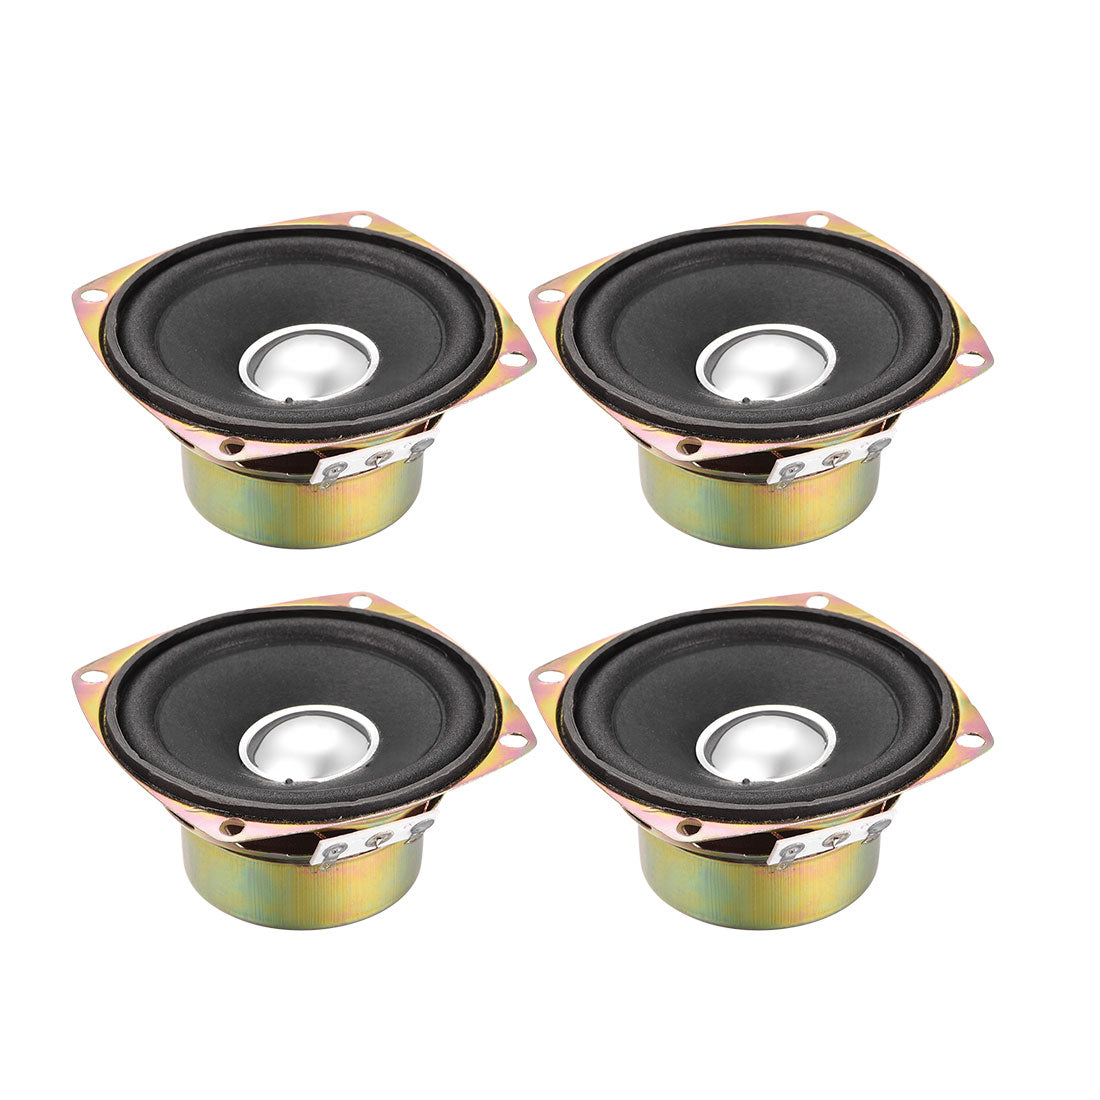 uxcell Uxcell 10W 4 Ohm 3 Inch 78x78x39mm Anti-magnetic Speaker Tweeter Speakers 4pcs